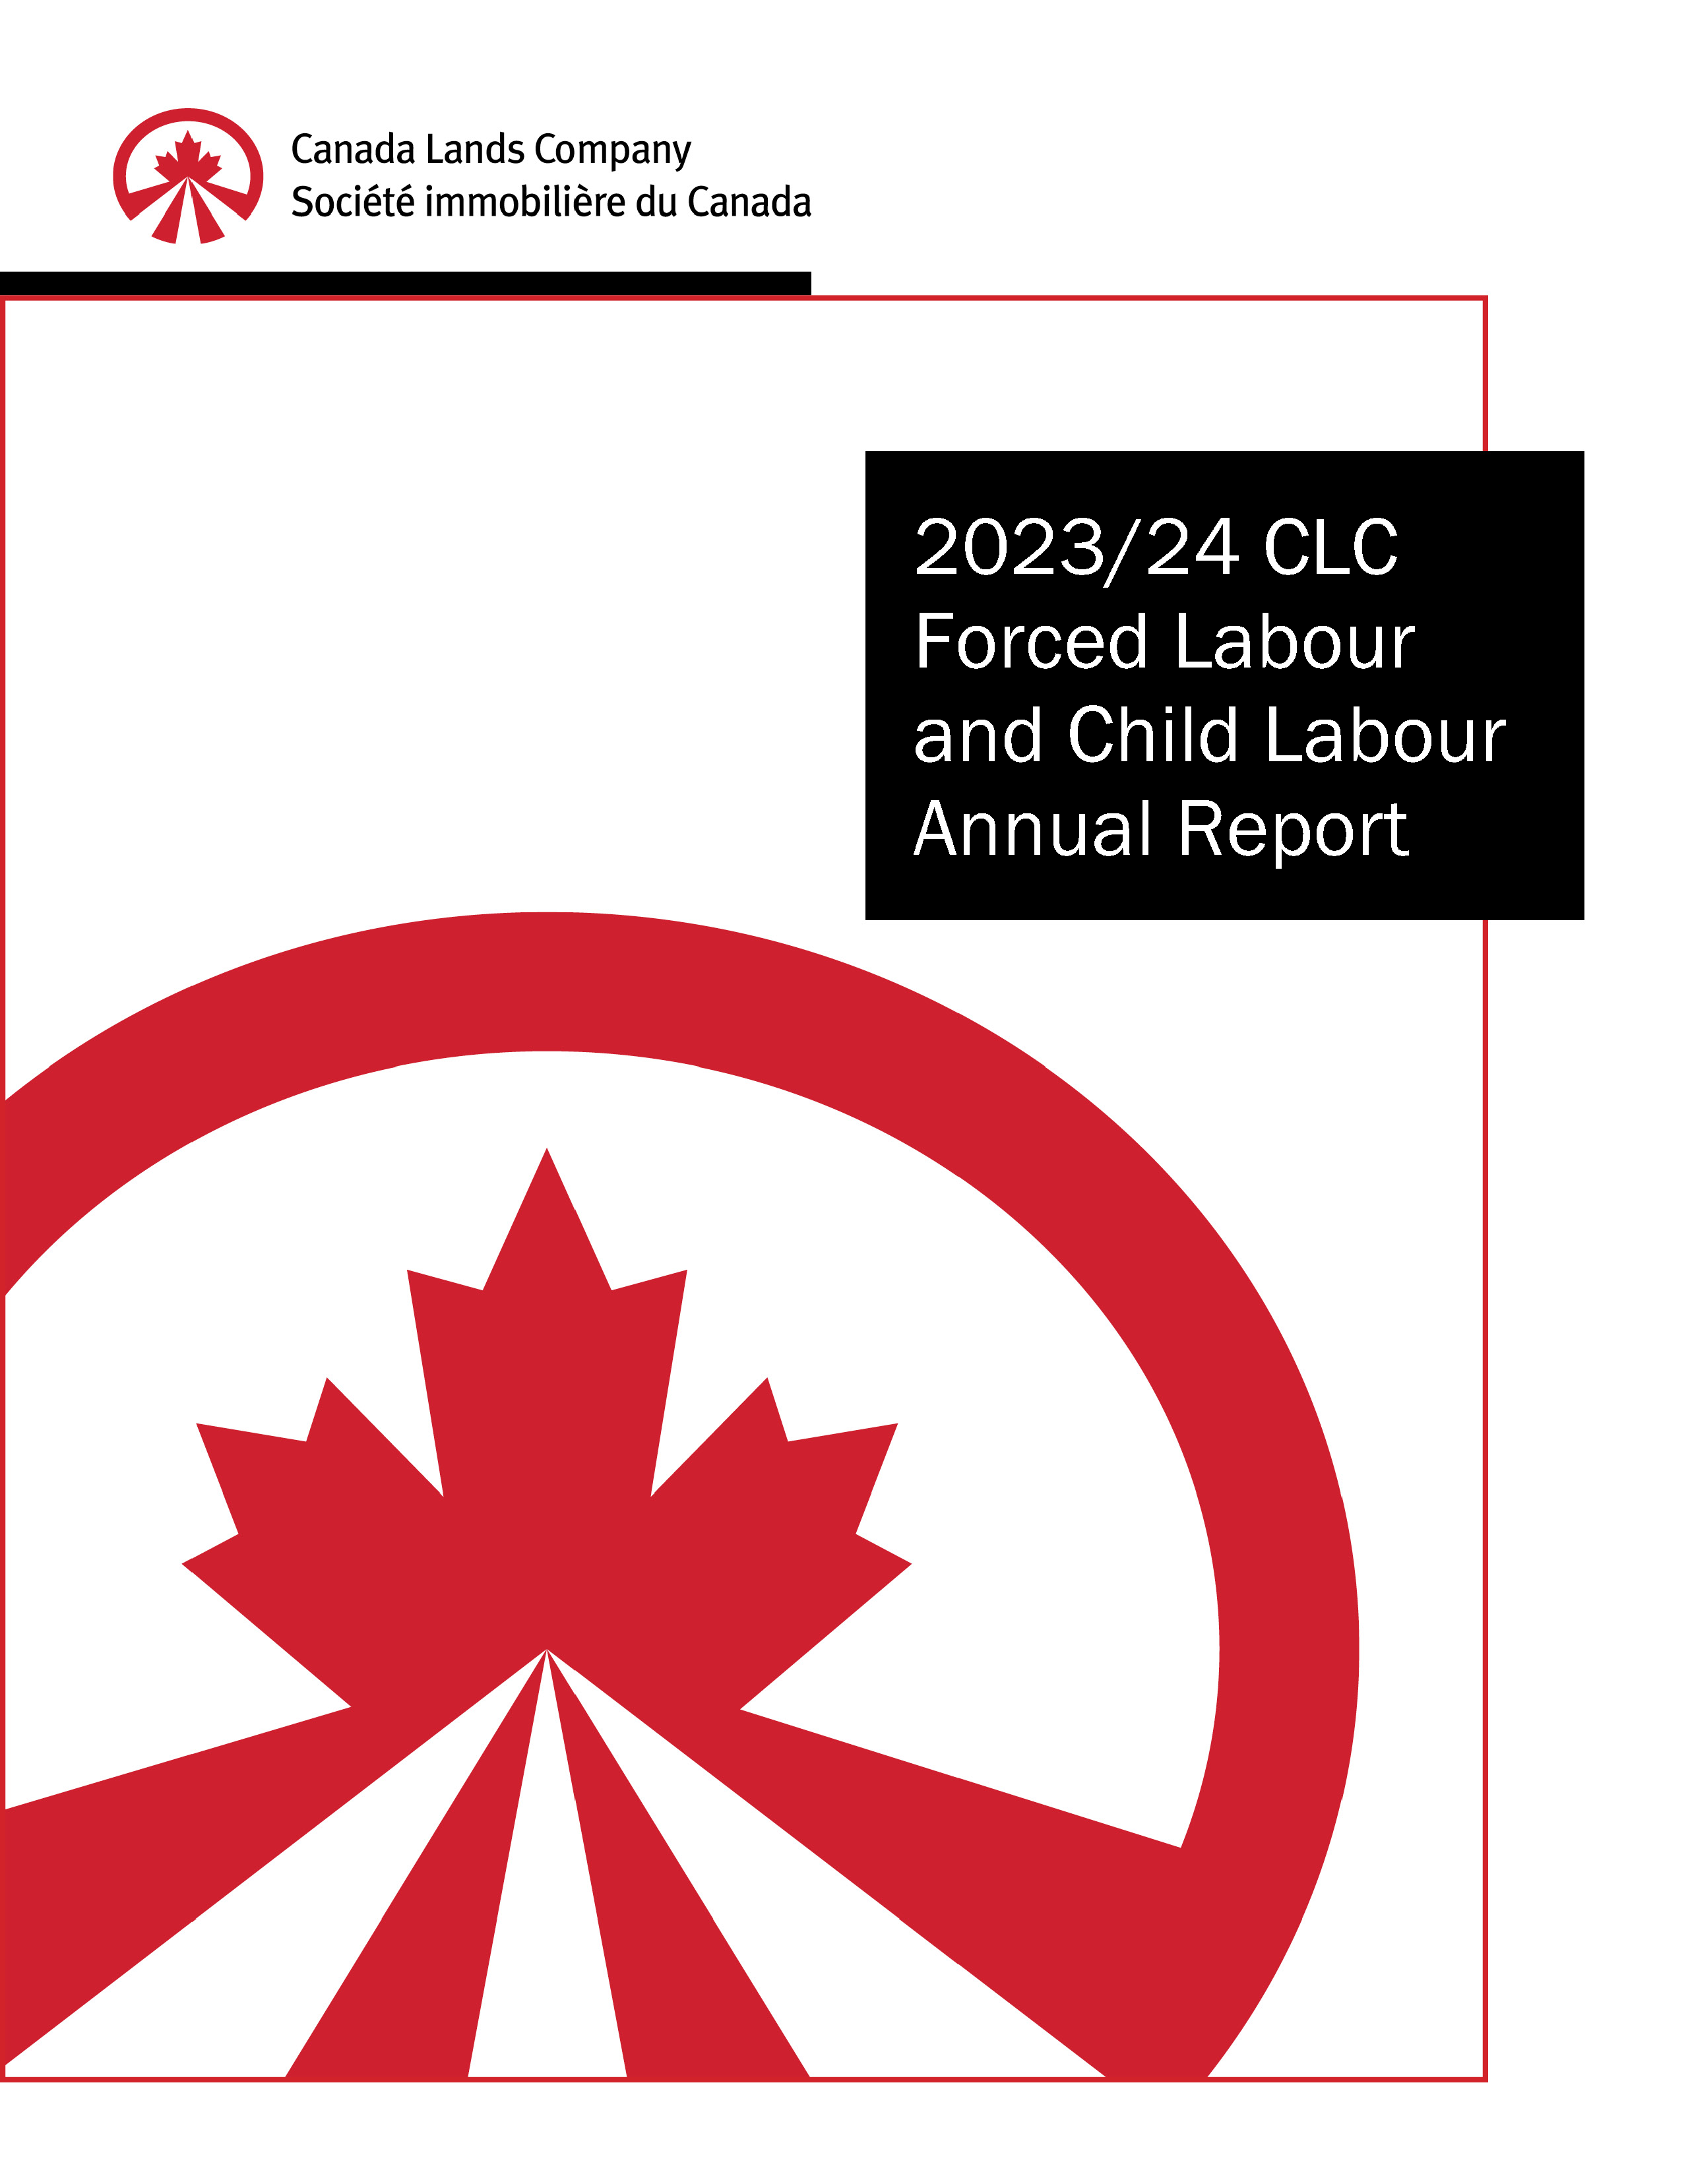 Report cover page in English for CLC 2023-24 Forced Labour and Child Labour